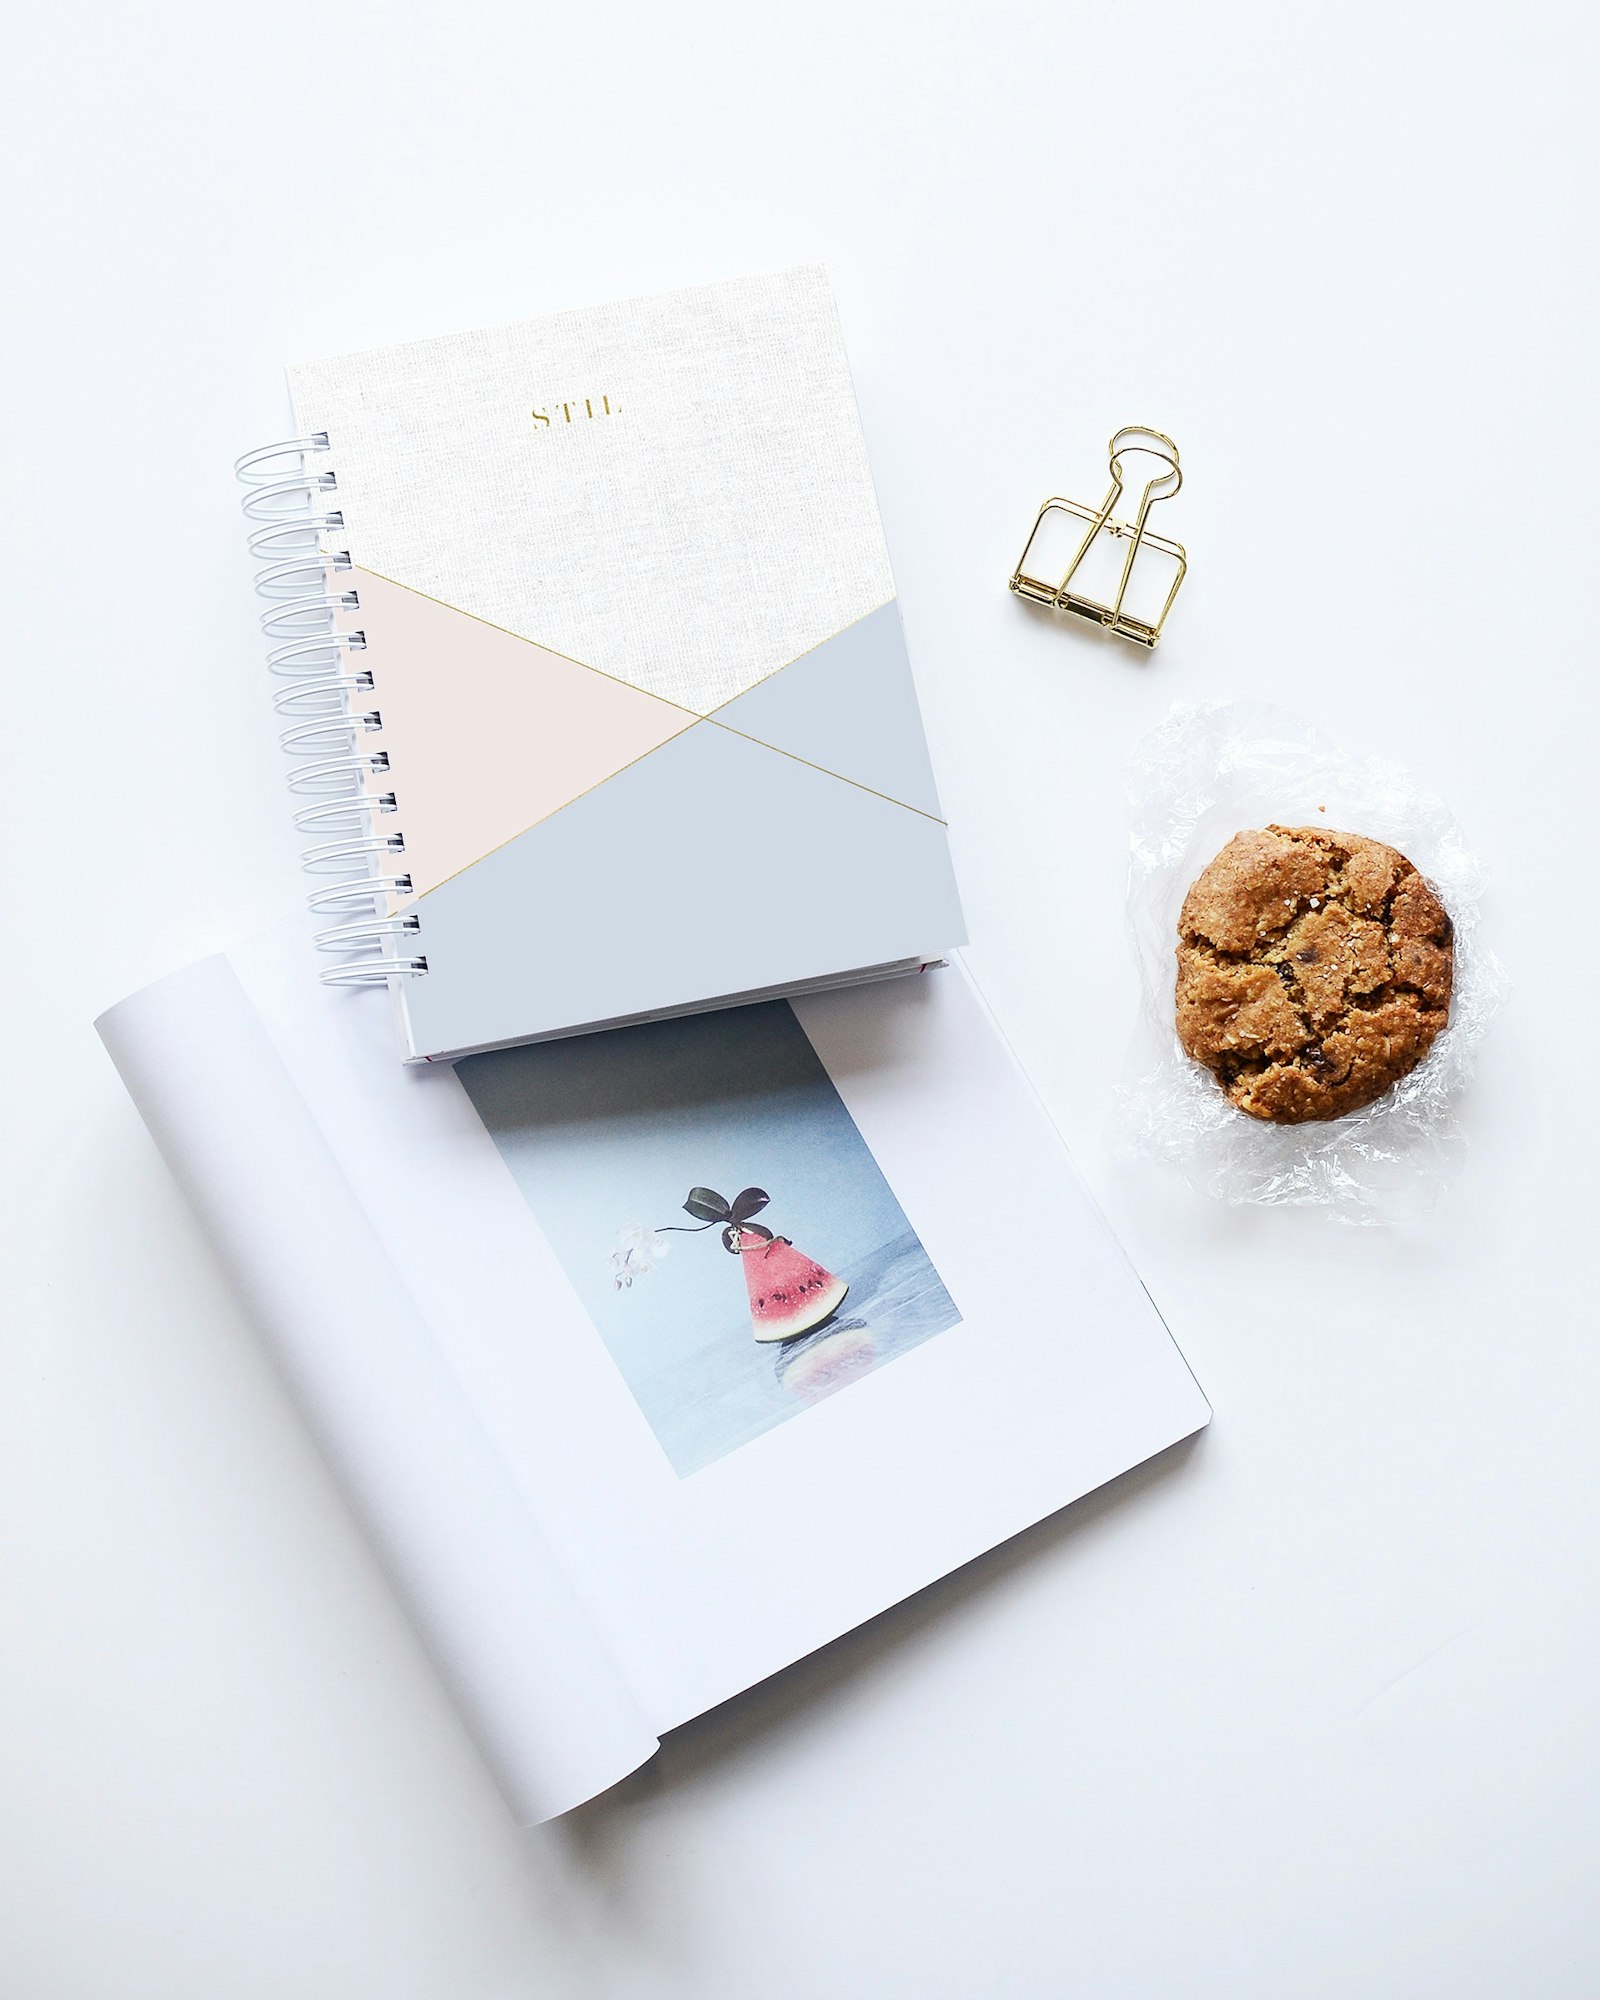 Sigma 30mm F1.4 EX DC HSM sample photo. Cookie beside two notebooks photography